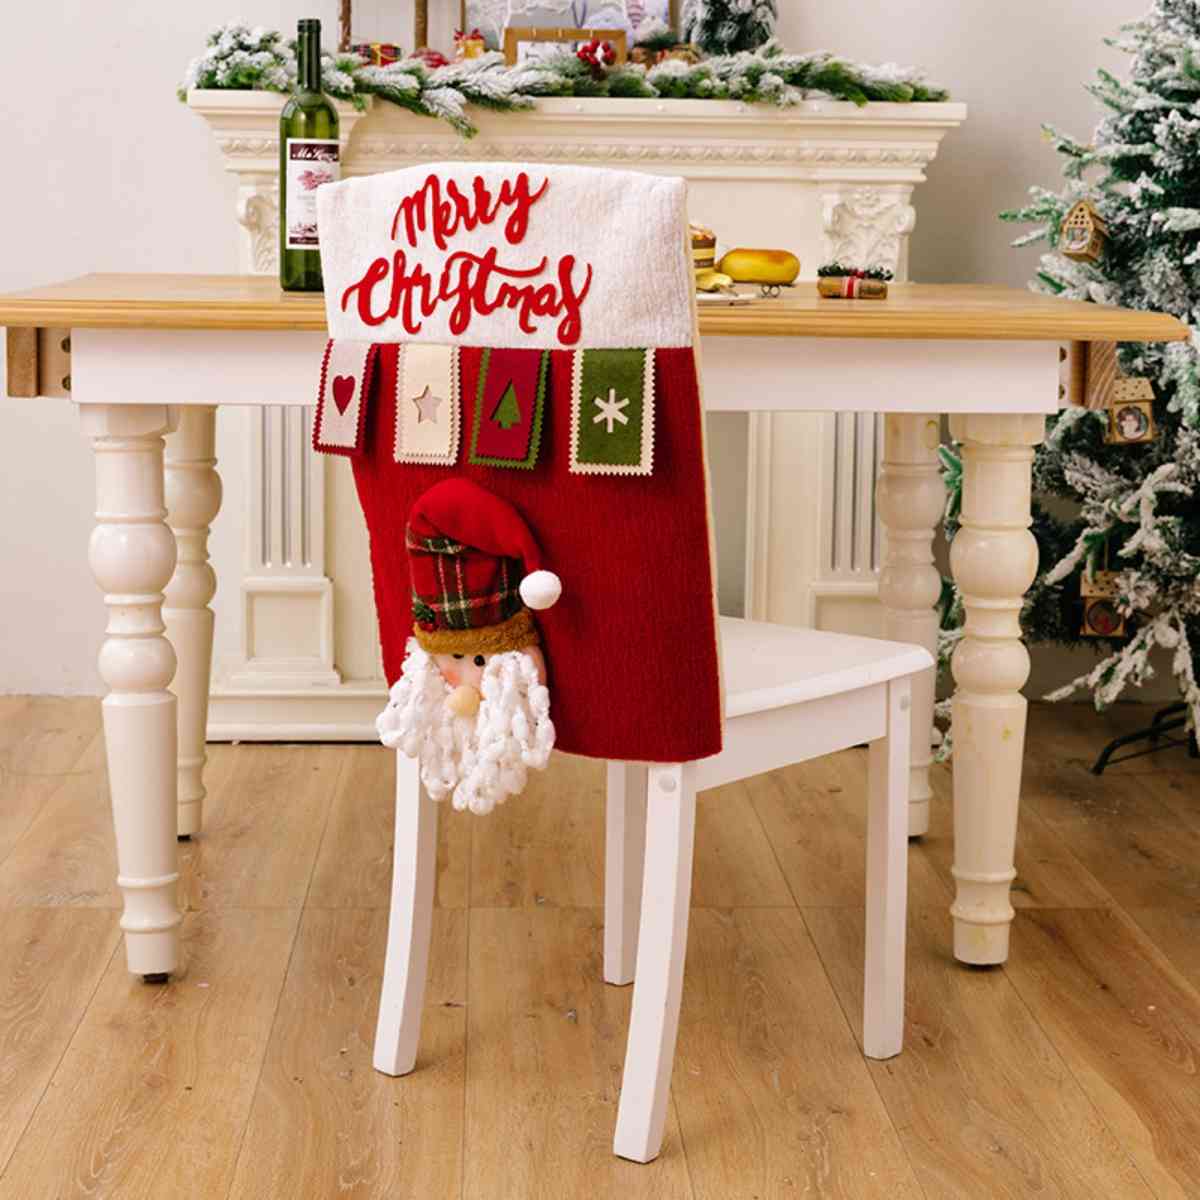 MERRY CHRISTMAS Chair Cover - Dash Trend